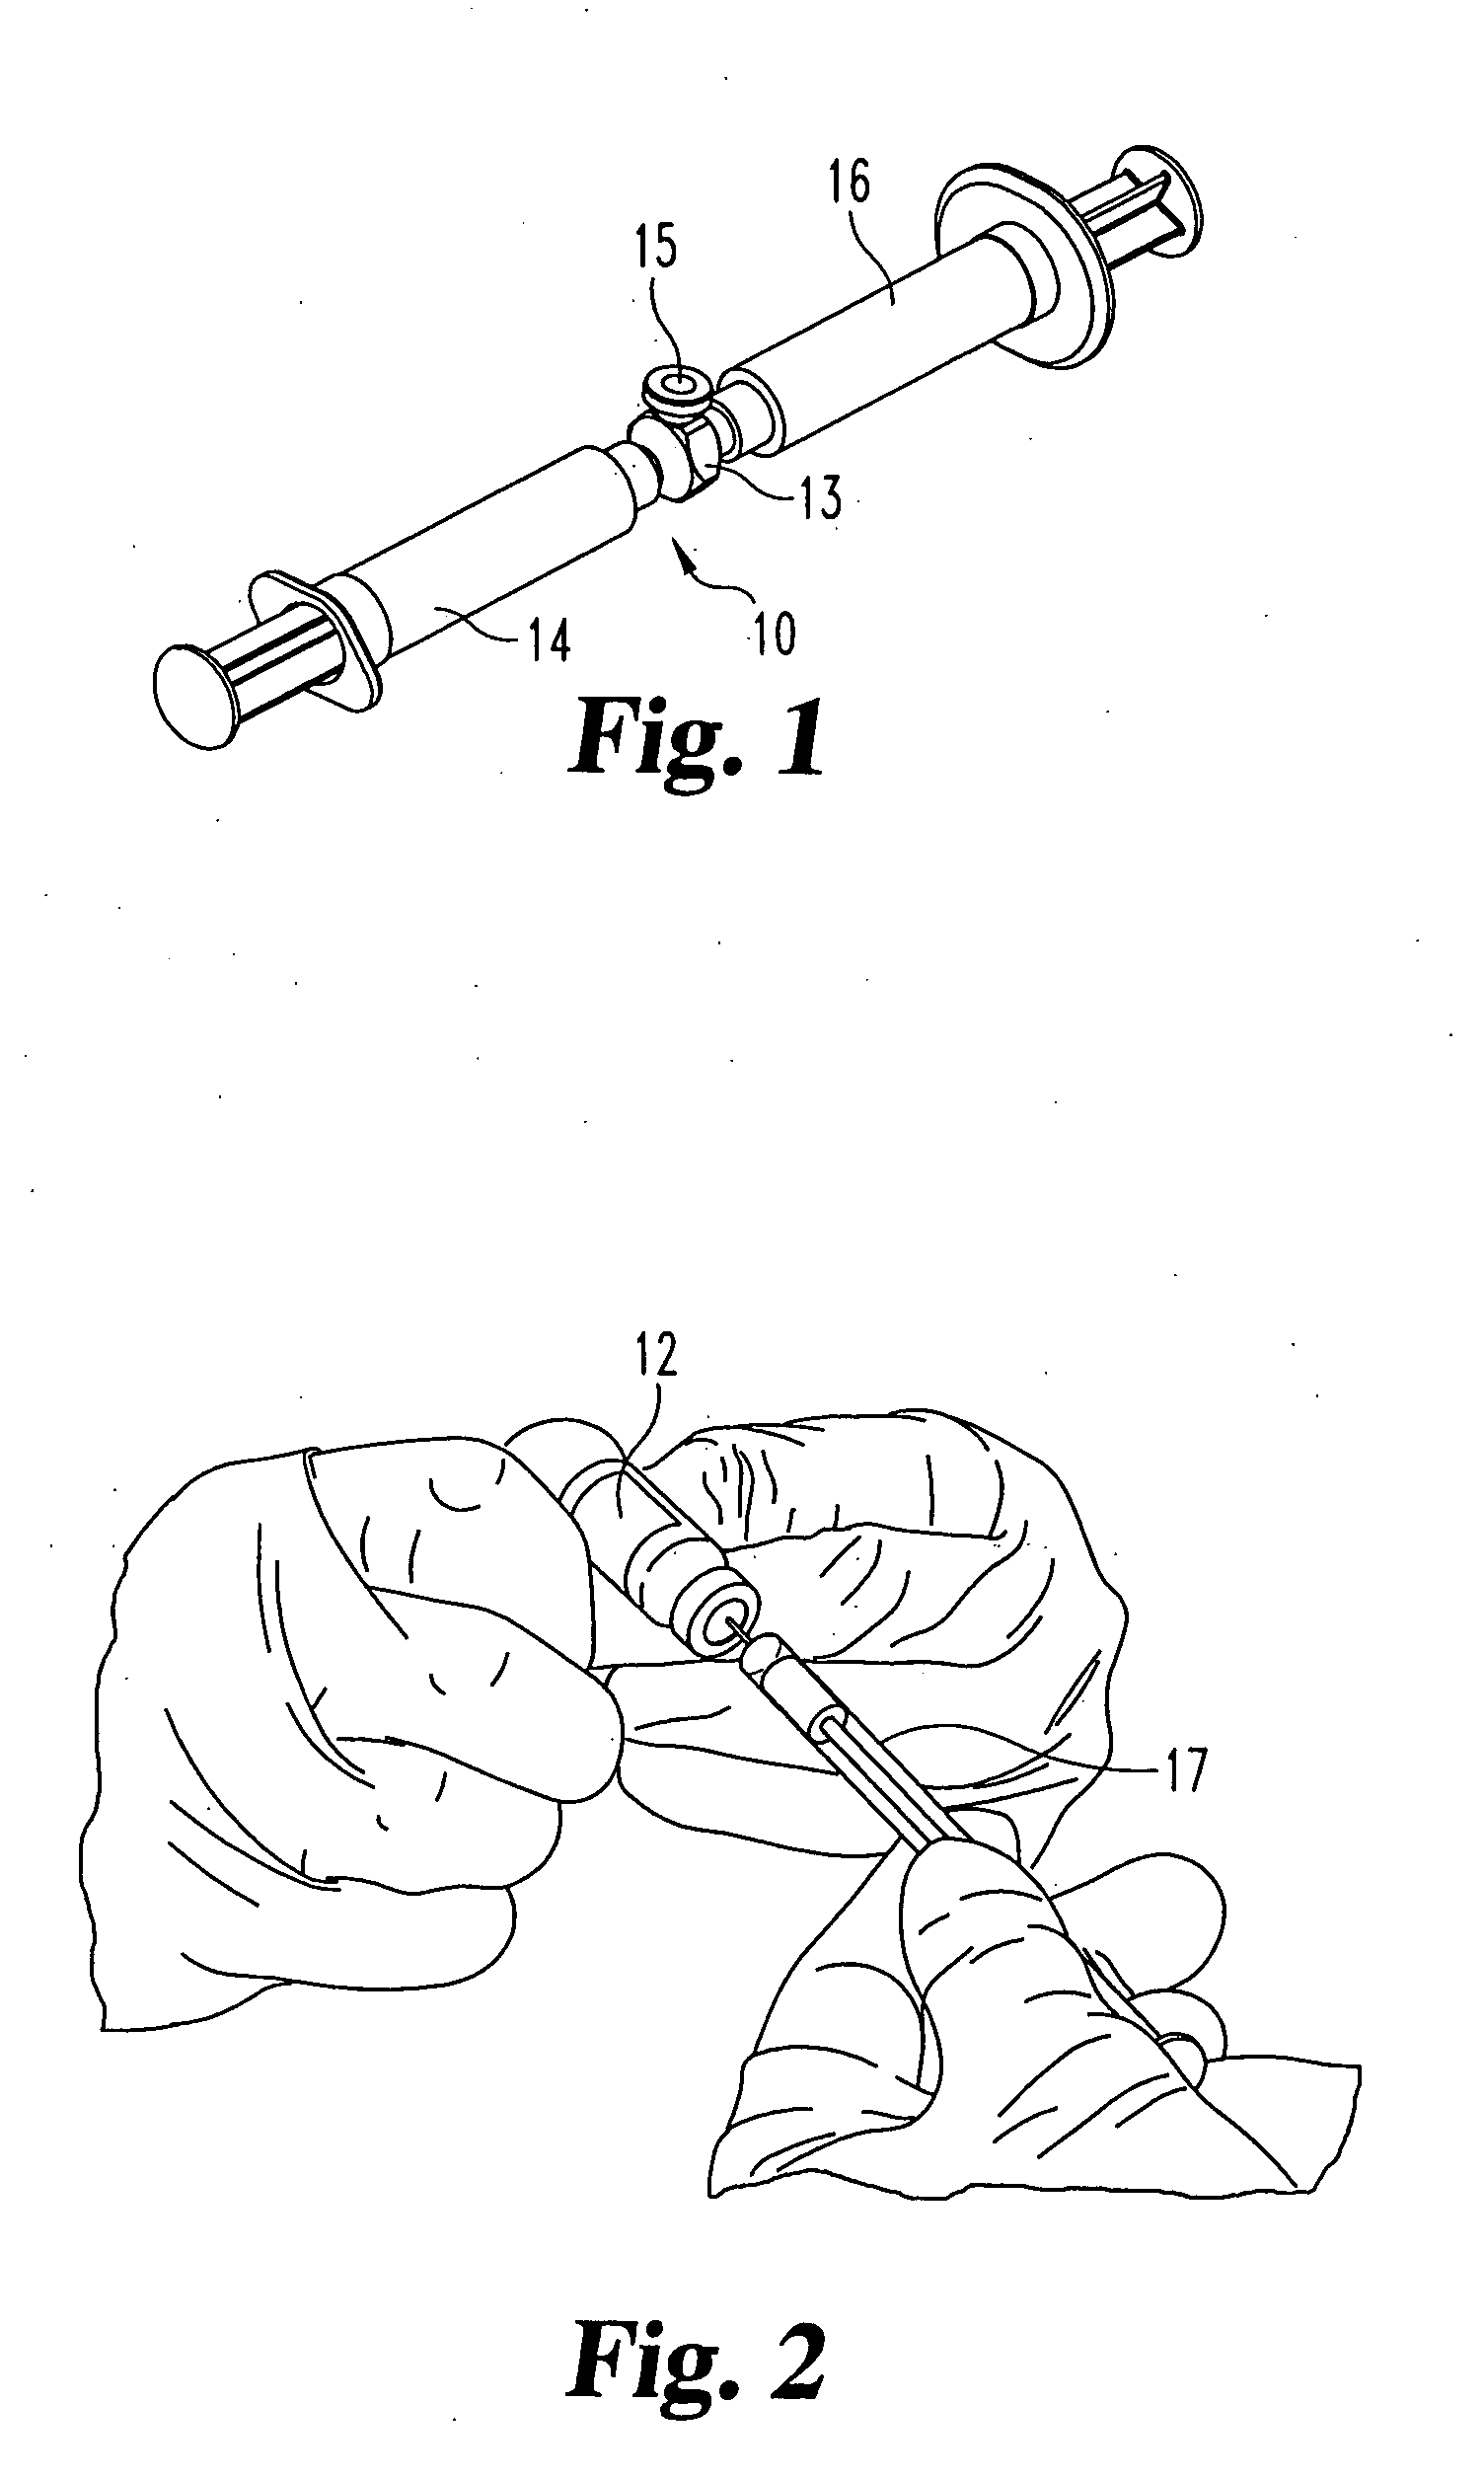 Methods for injecting a curable biomaterial into an intervertebral space